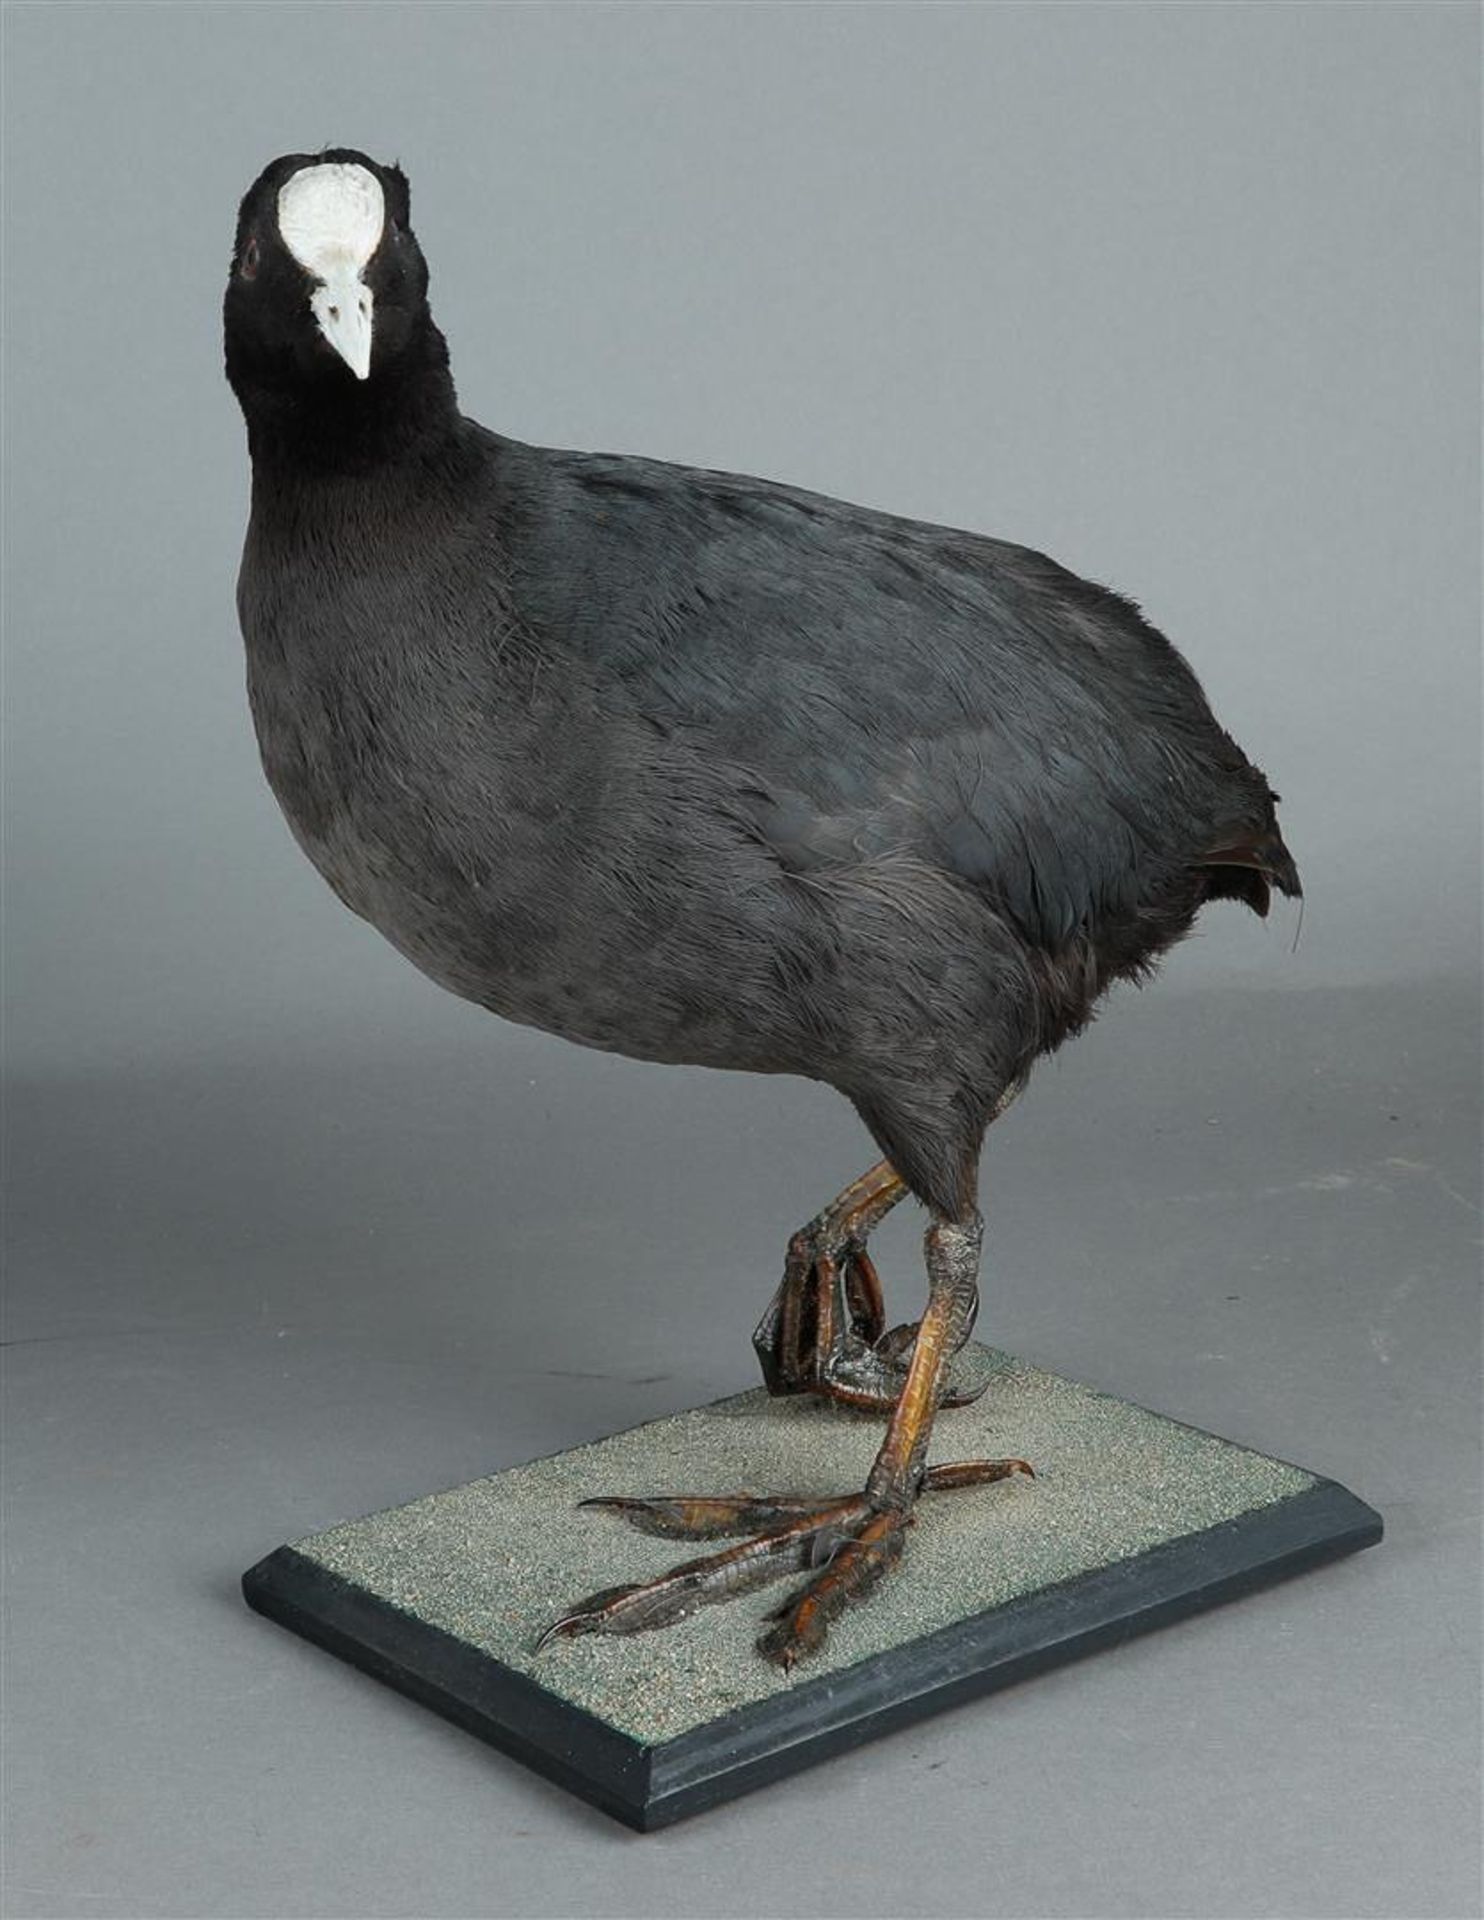 A coot, full-body mount, Fulica atra, ringed.